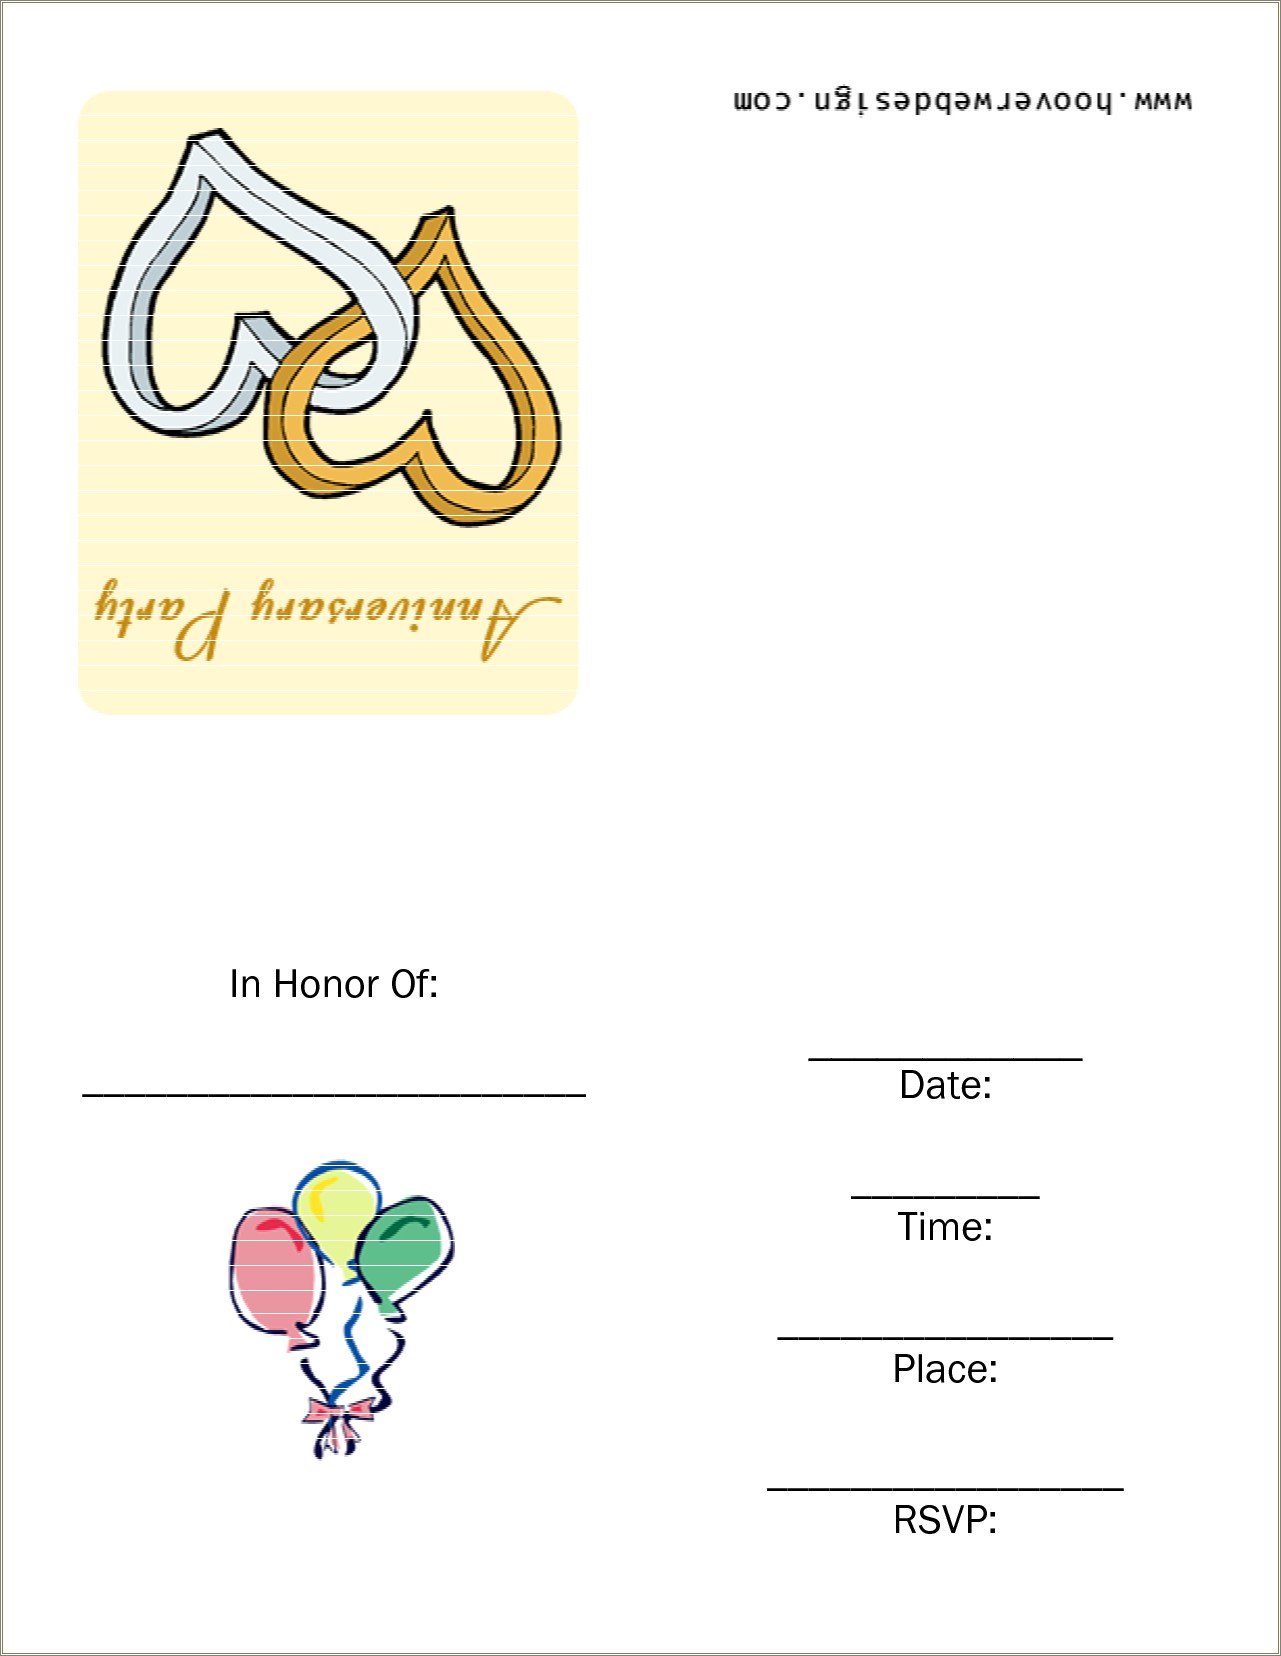 60th Wedding Anniversary Card Template For Free